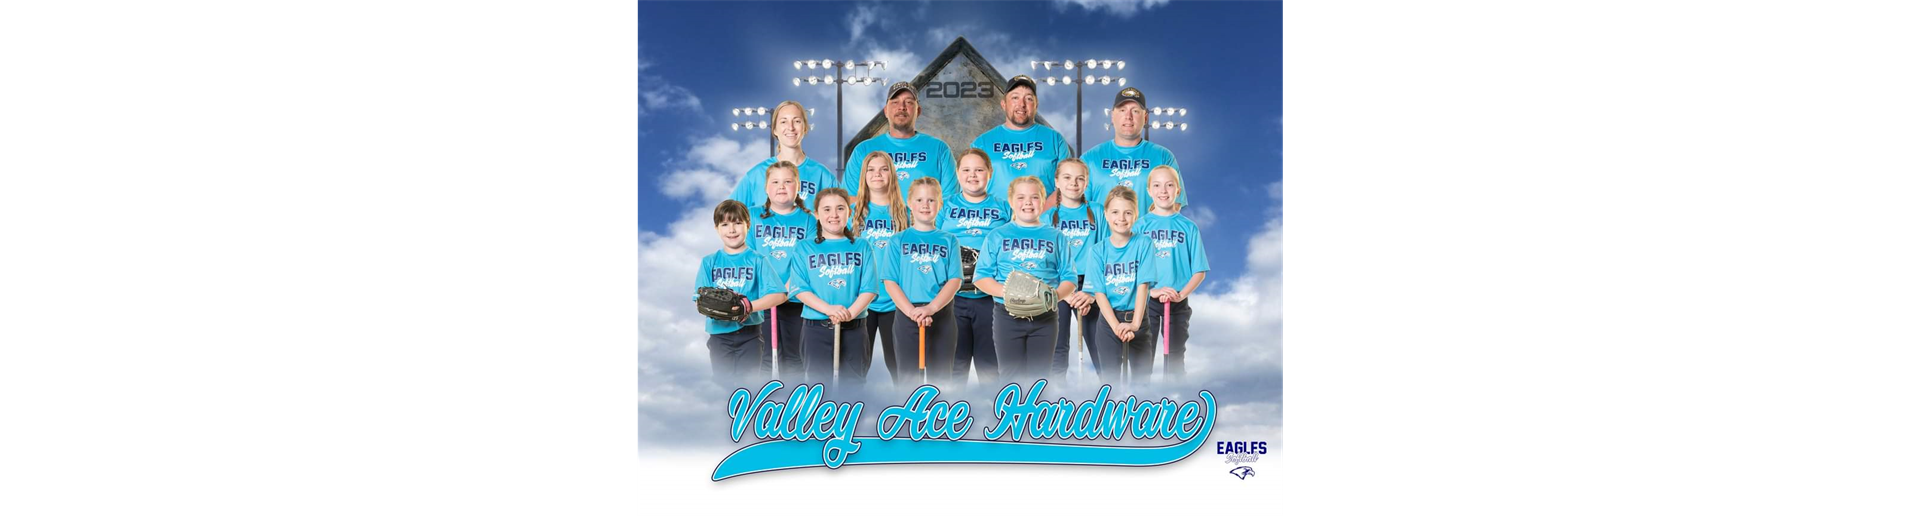 Valley Ace Hardware -- Minors Team